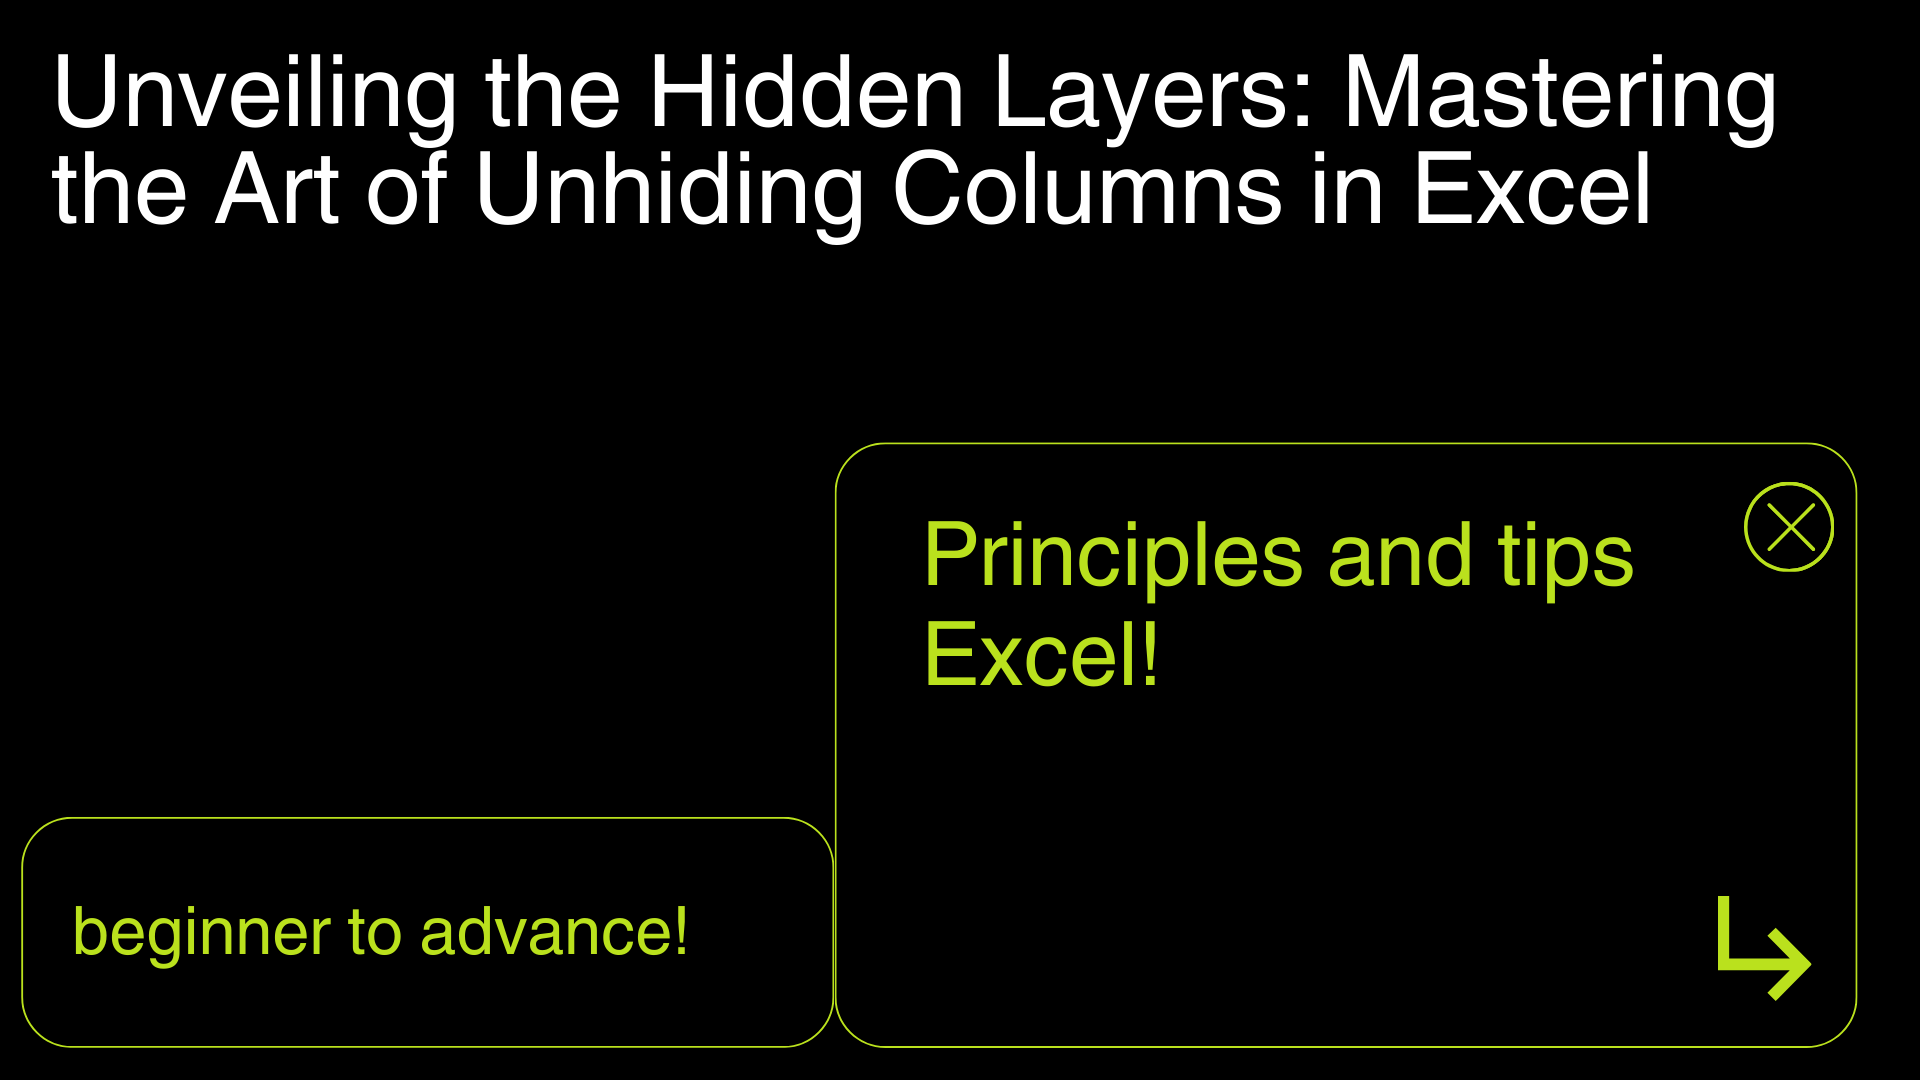 Unveiling the Hidden Layers: Mastering the Art of Unhiding Columns in Excel